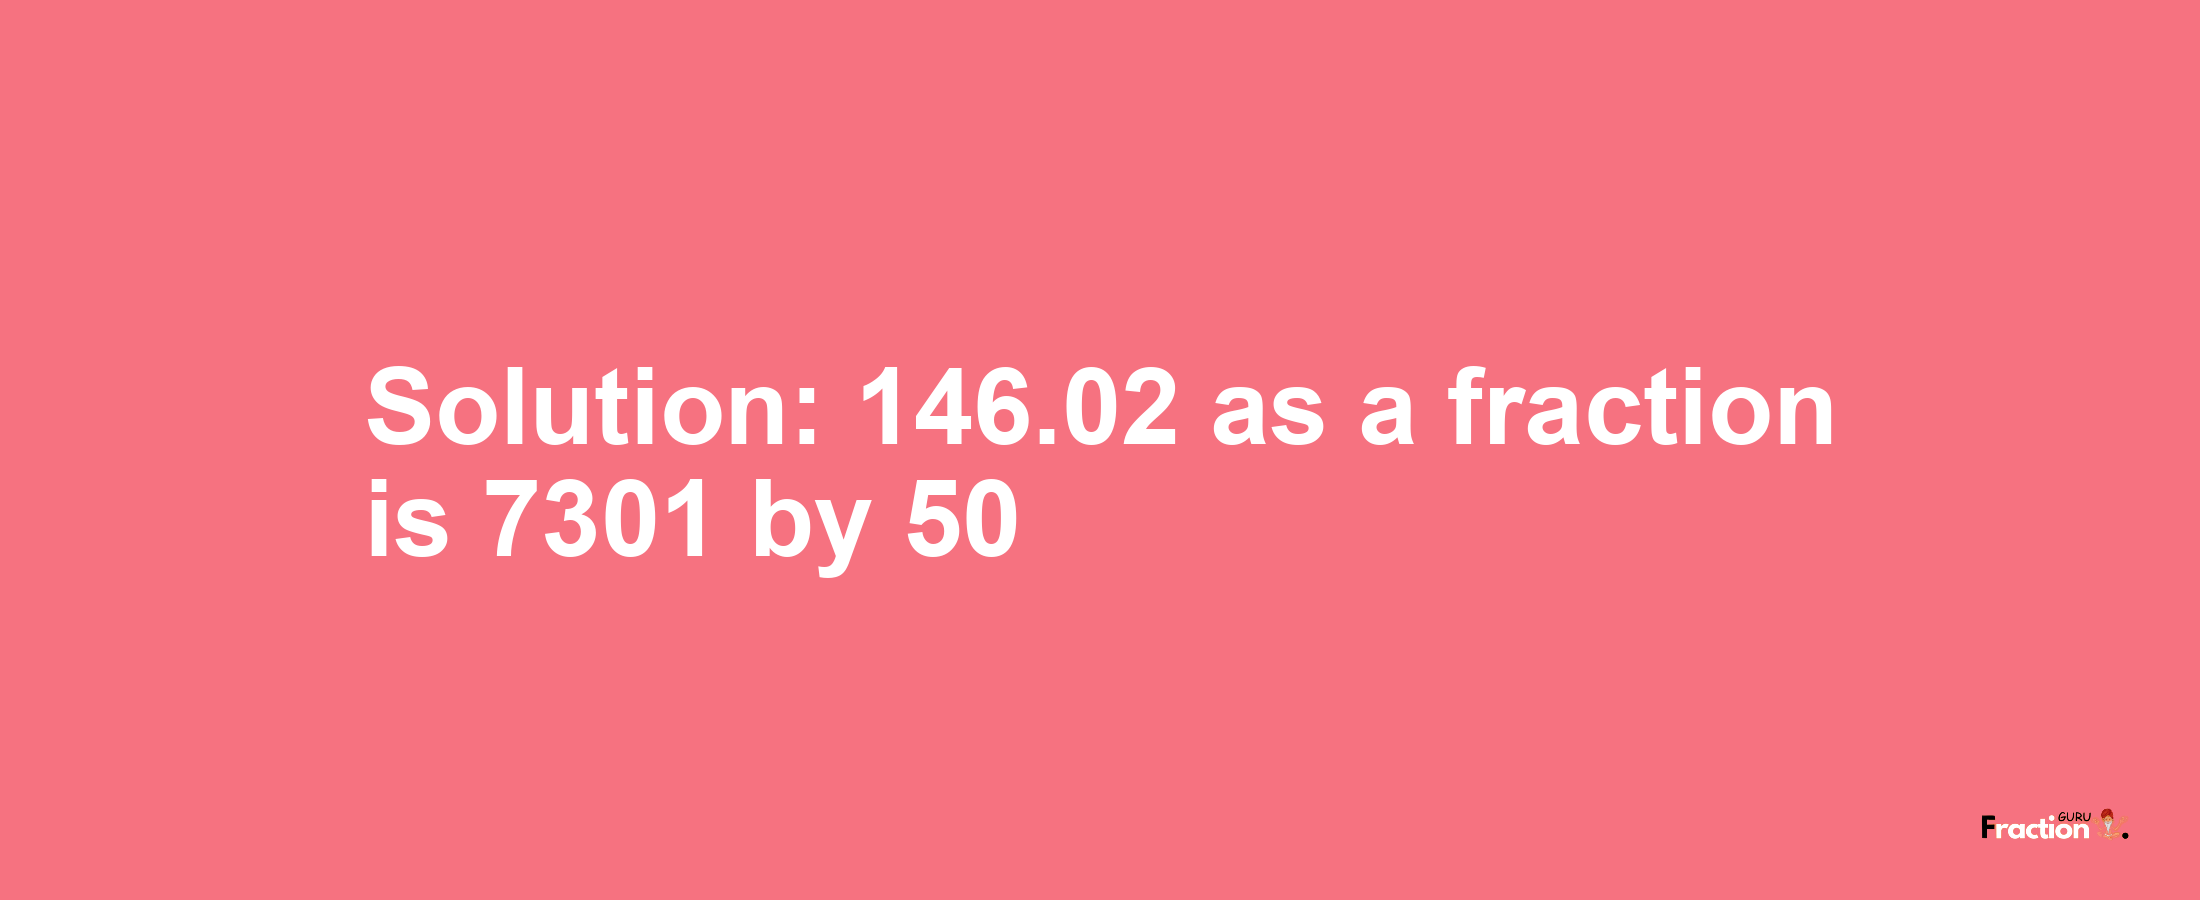 Solution:146.02 as a fraction is 7301/50